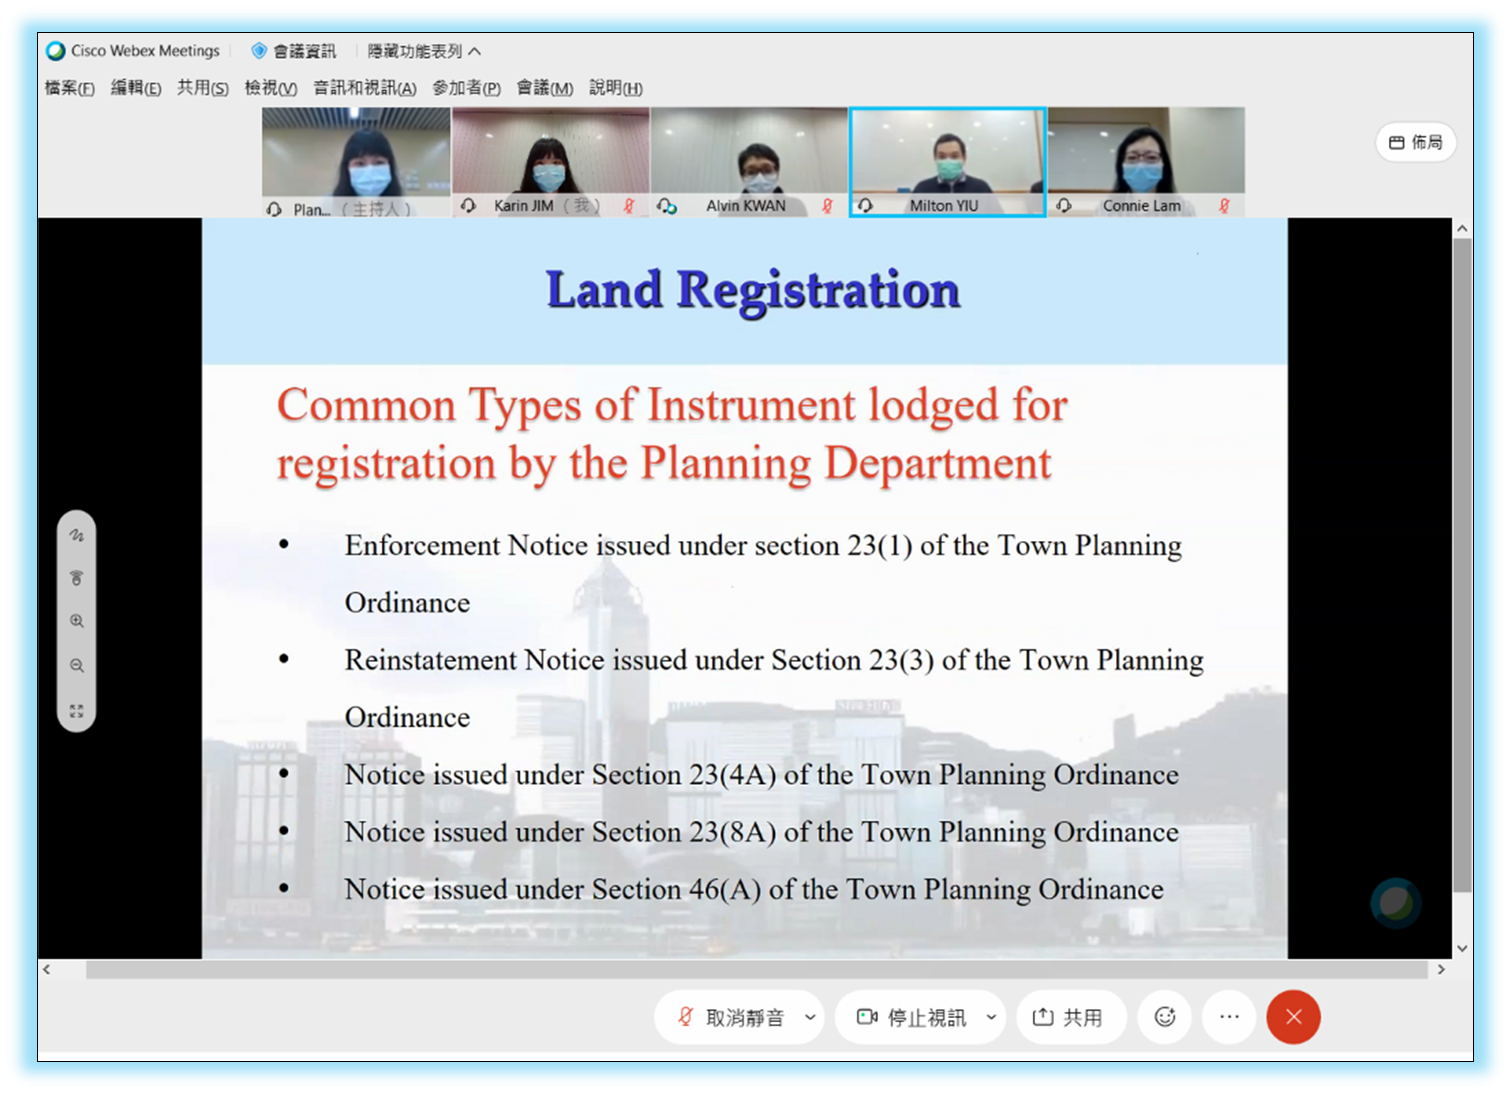 Web Briefing on Land Registry’s Services for Planning Department